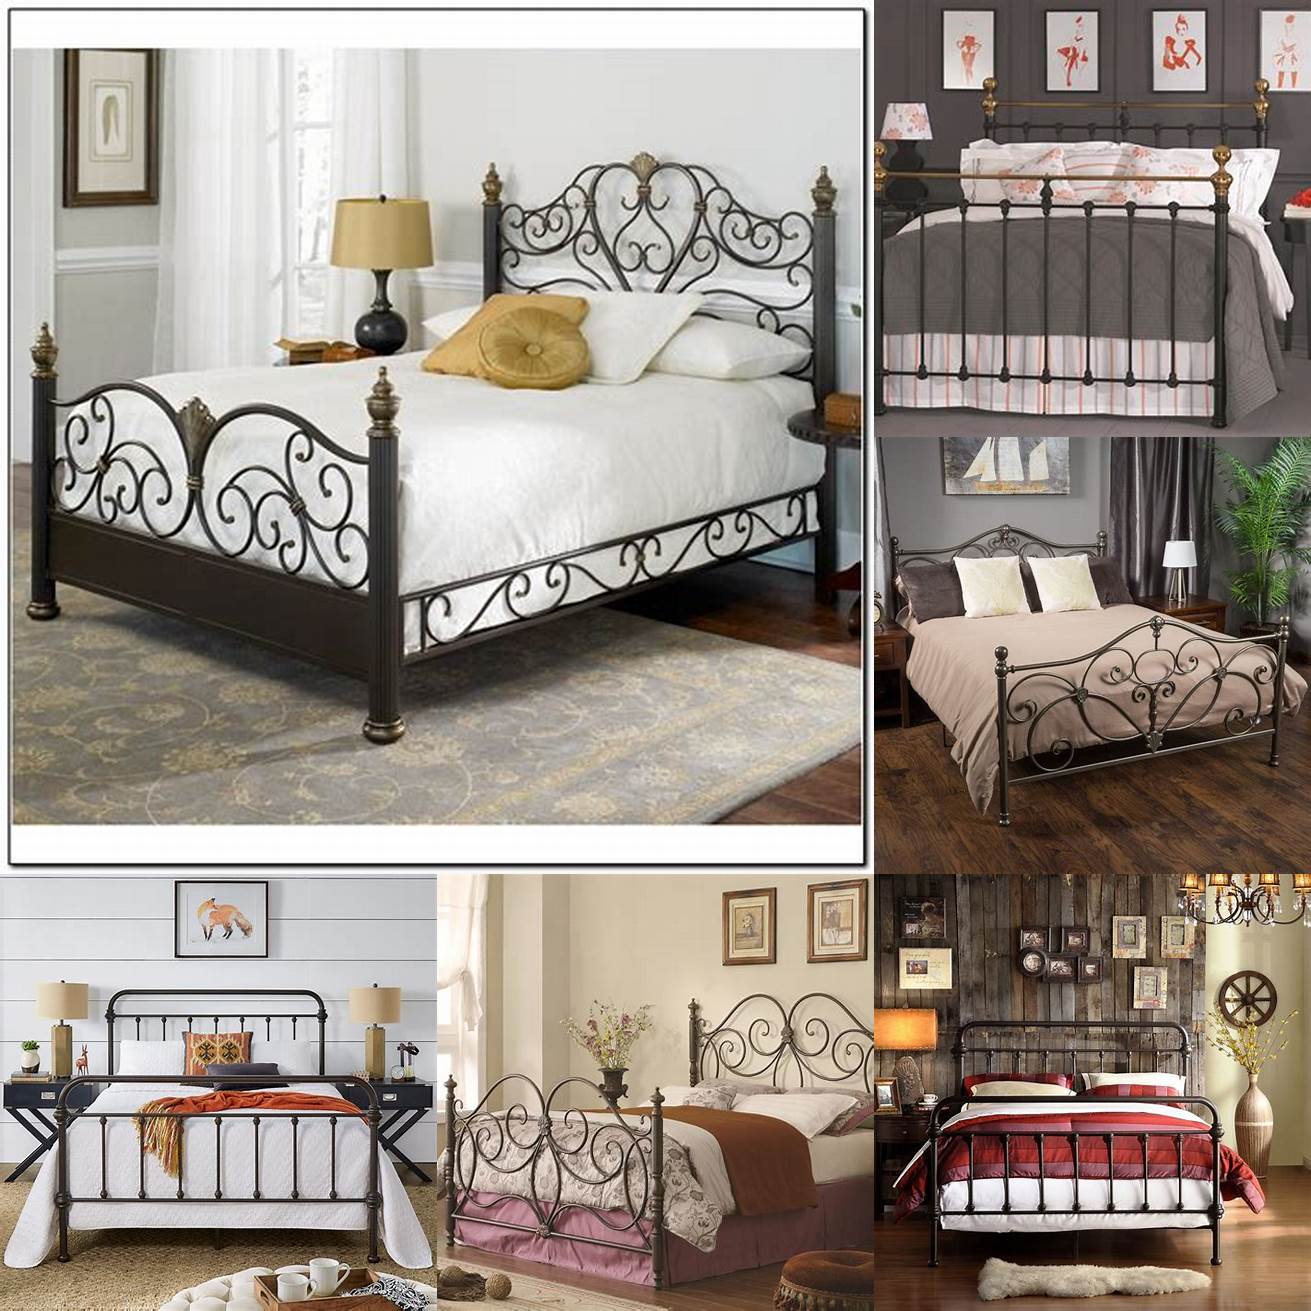 Aesthetics Iron bed frames have a timeless and elegant look that can add sophistication to any bedroom